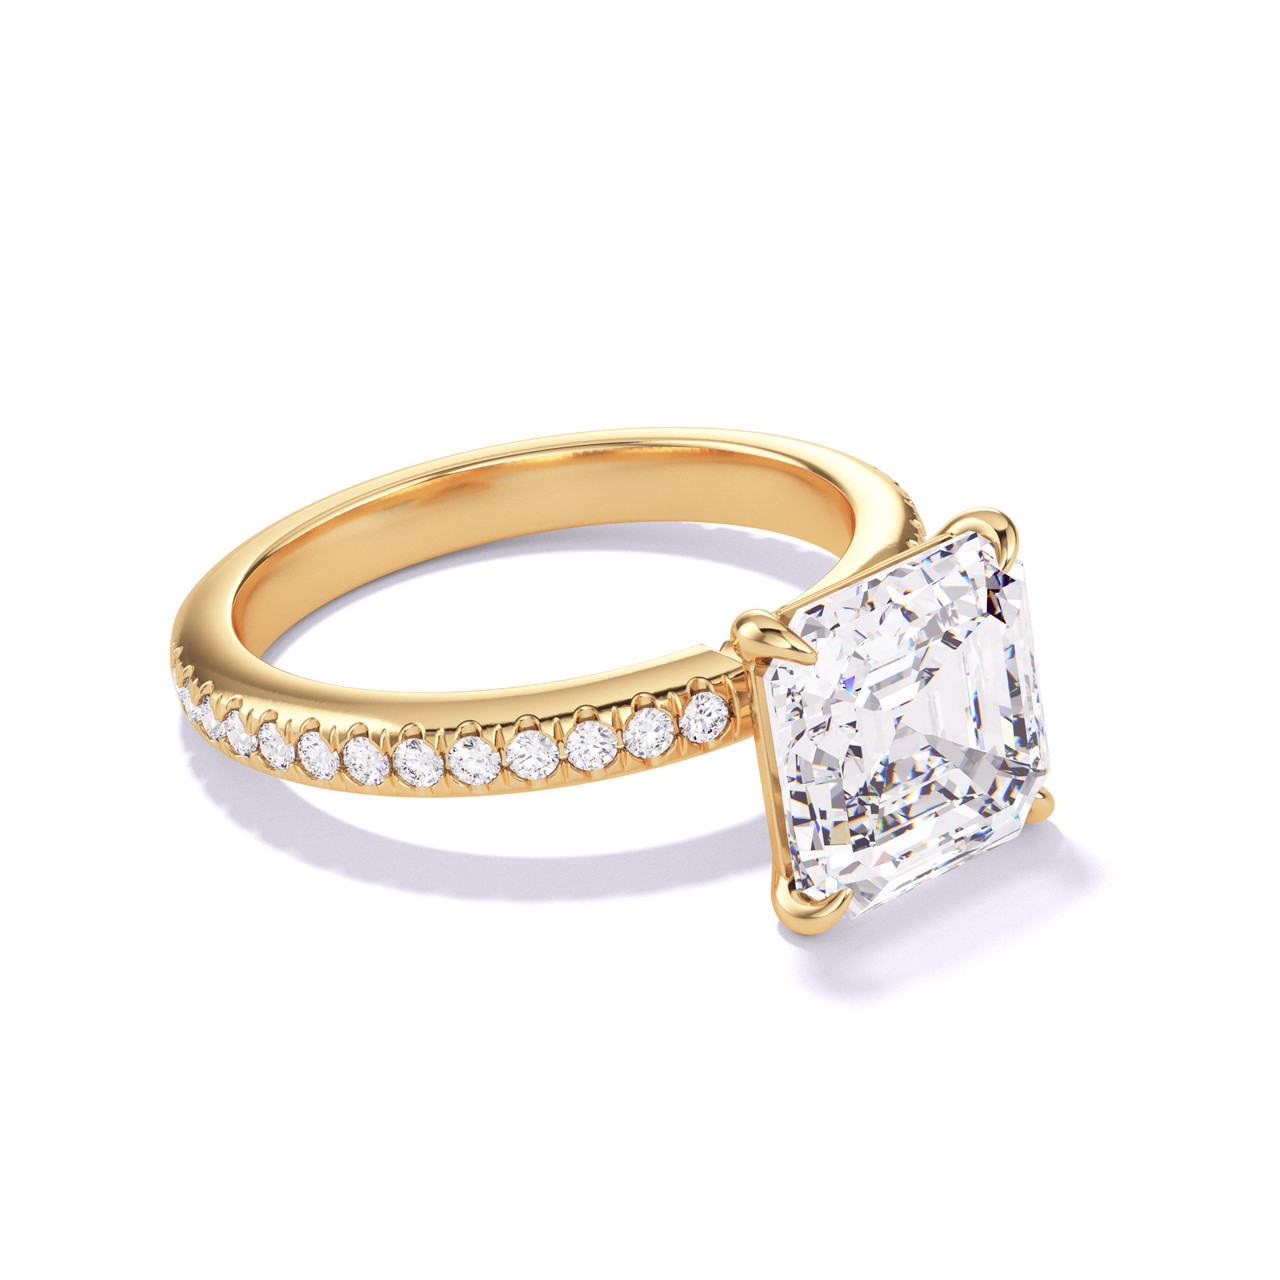 2023 engagement ring trends